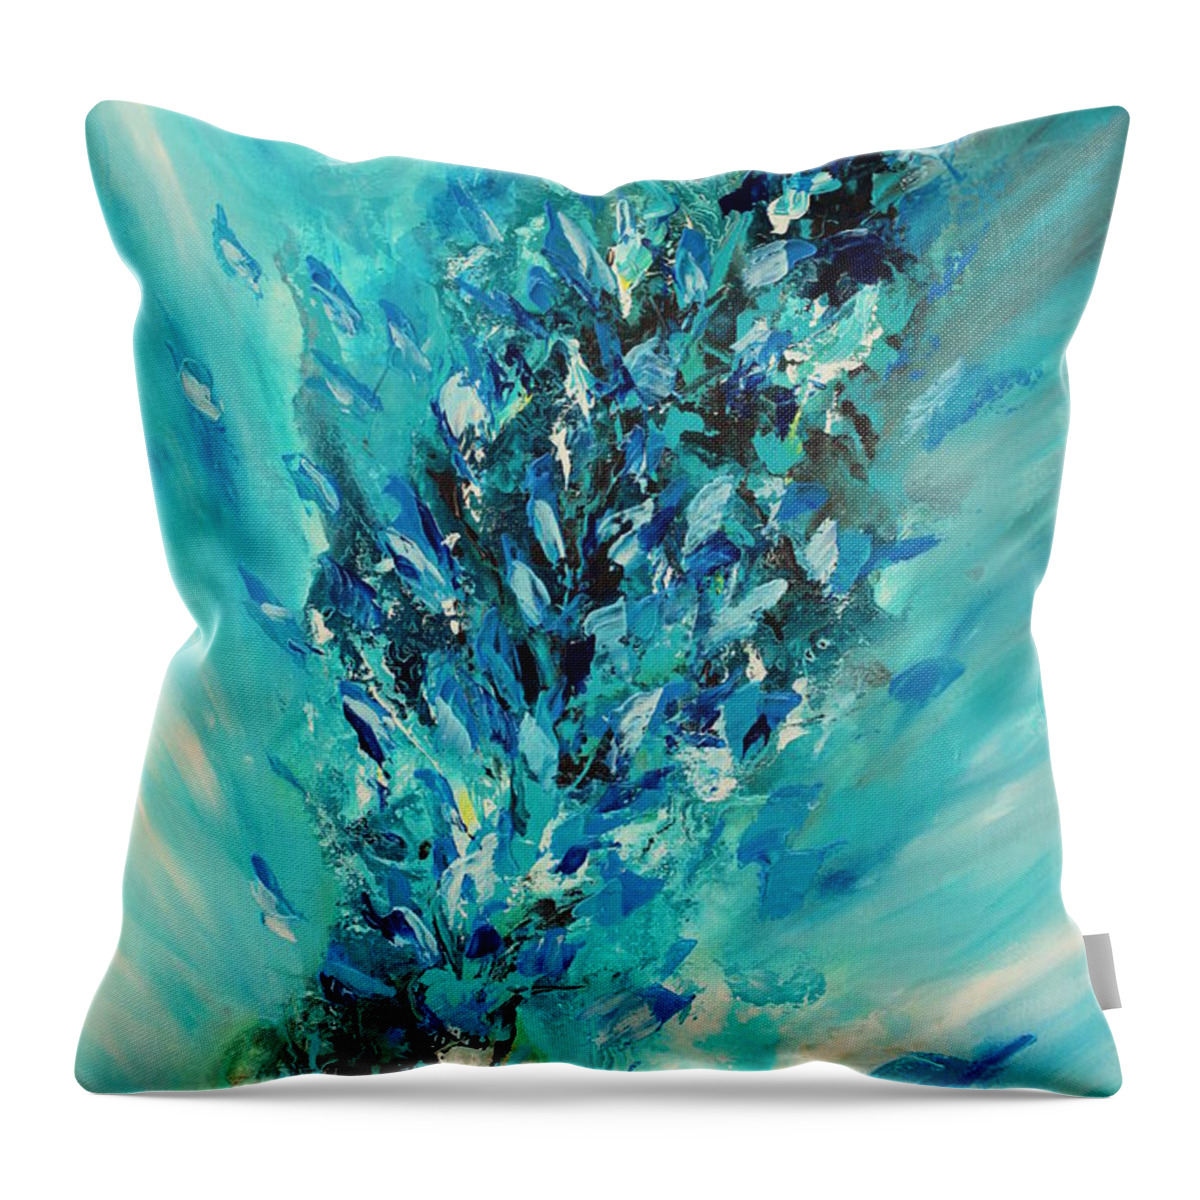 Swirl Throw Pillow featuring the painting Blue Power by Preethi Mathialagan